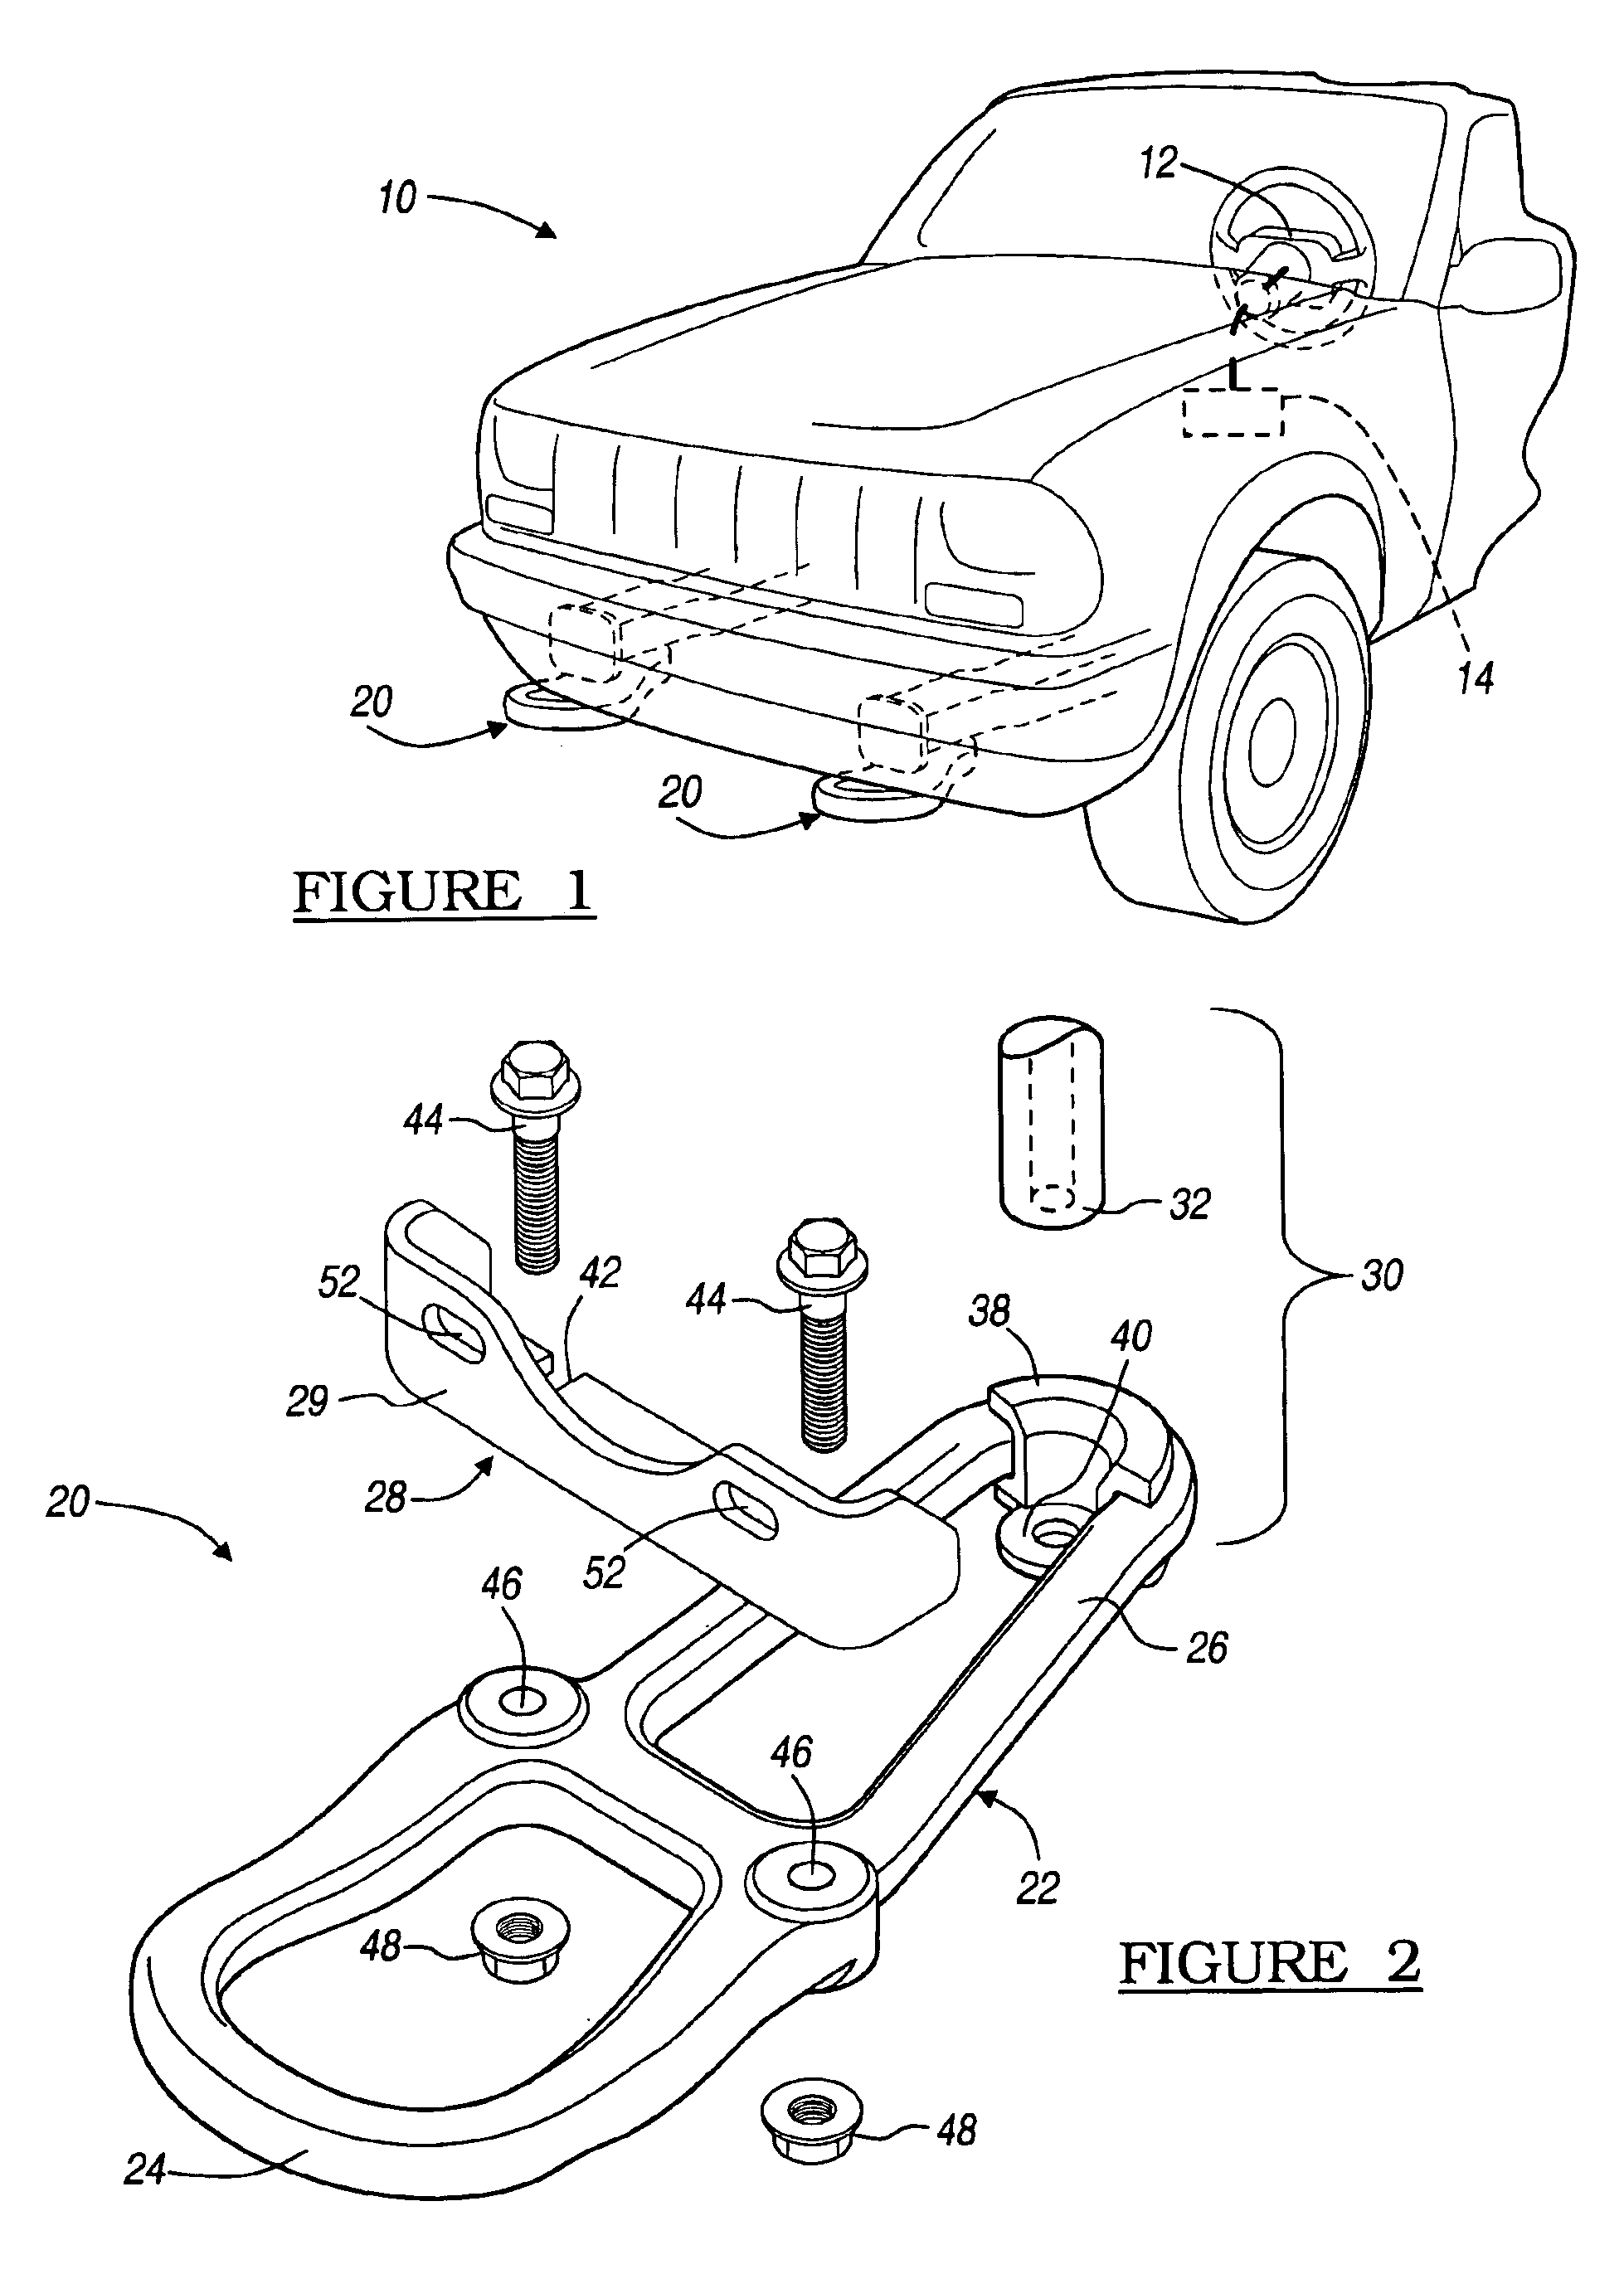 Detachable tow hook assembly